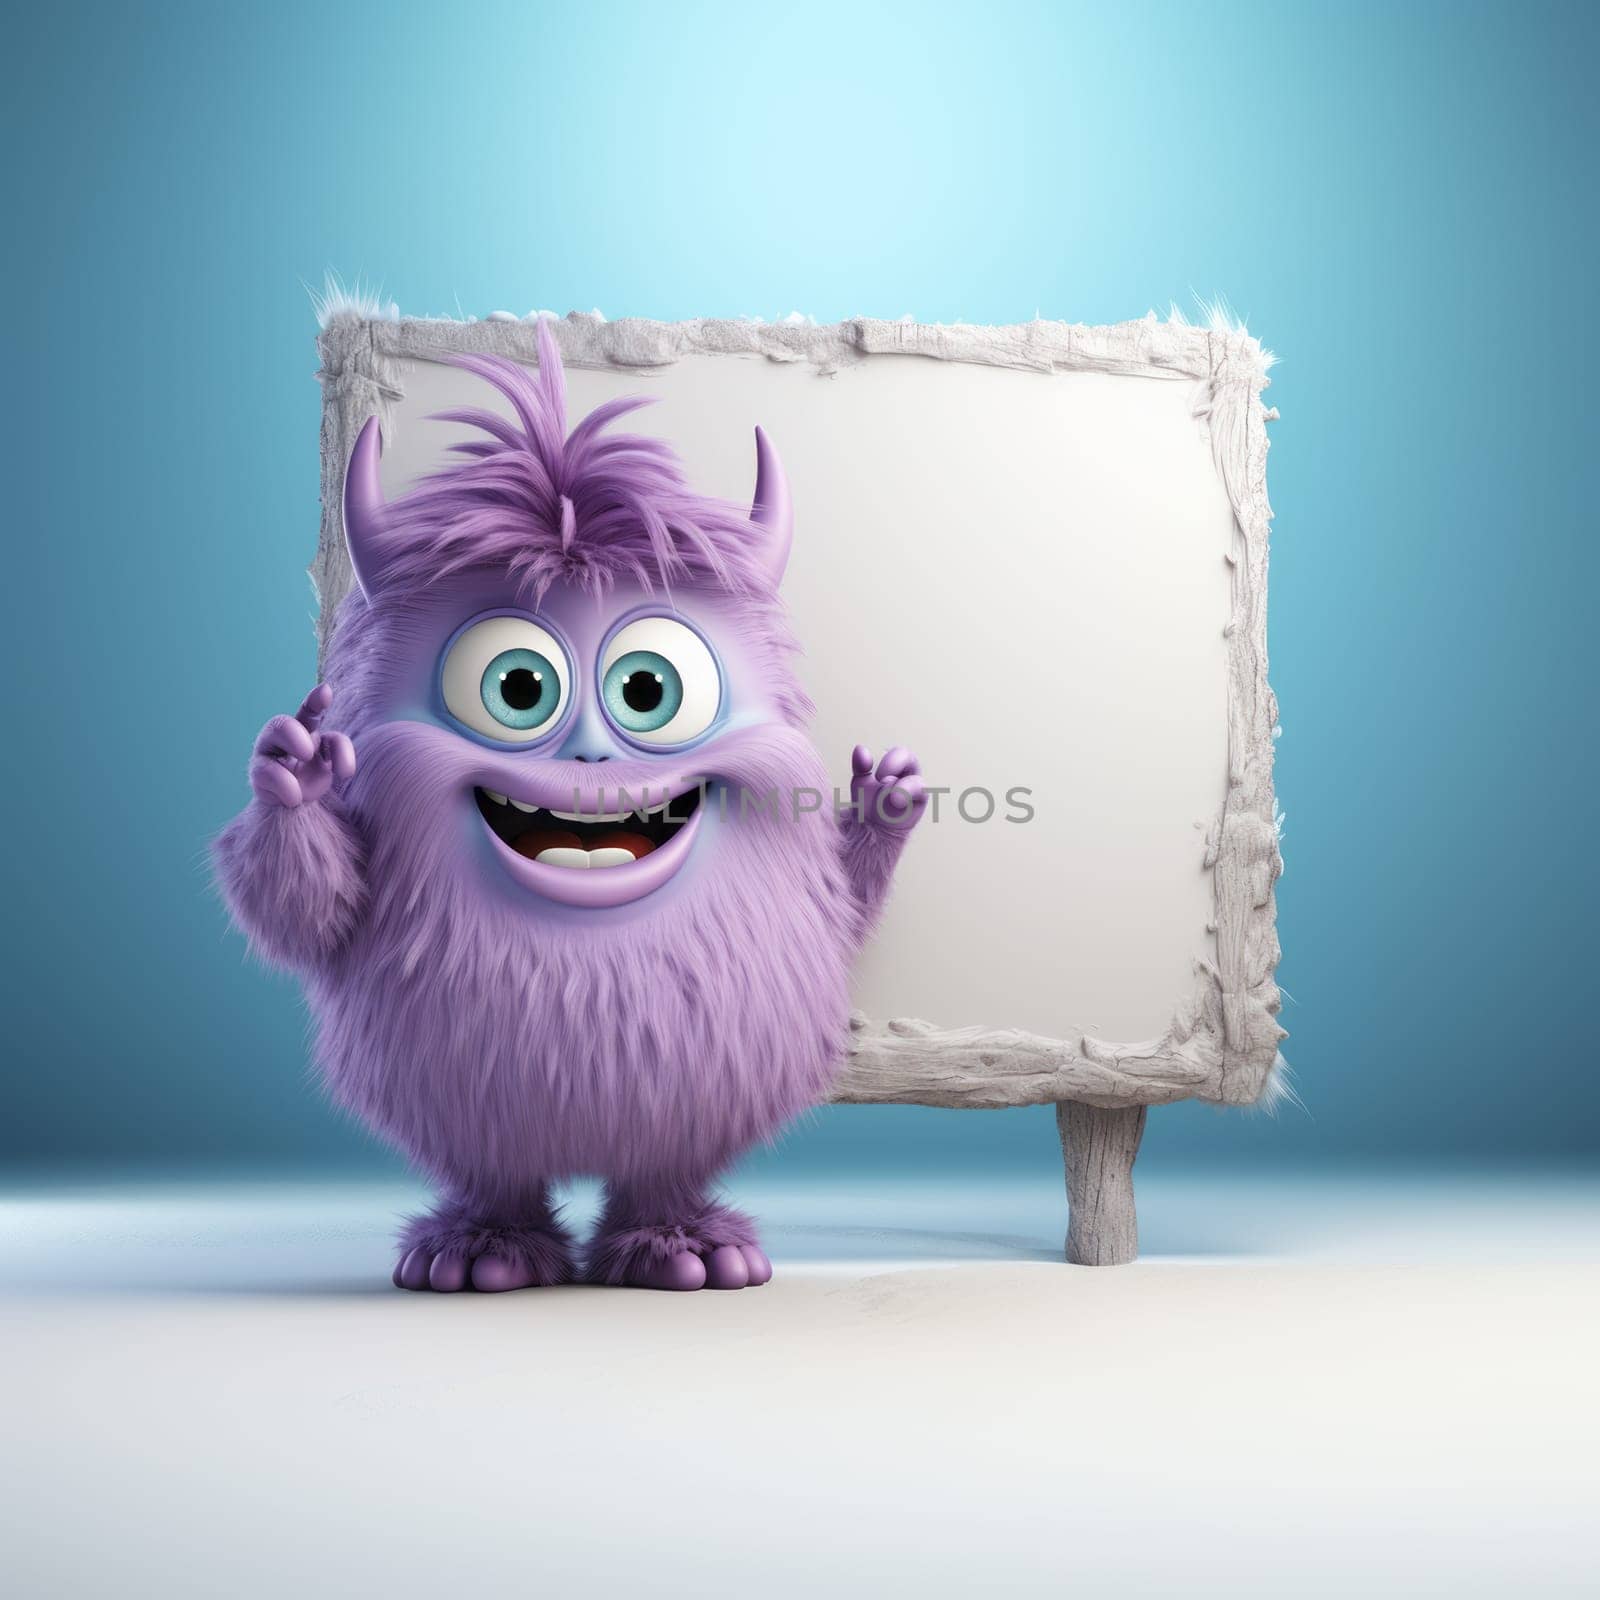 Funny purple monster , standing near white blank banner, isolated on white-blue background. Copy space